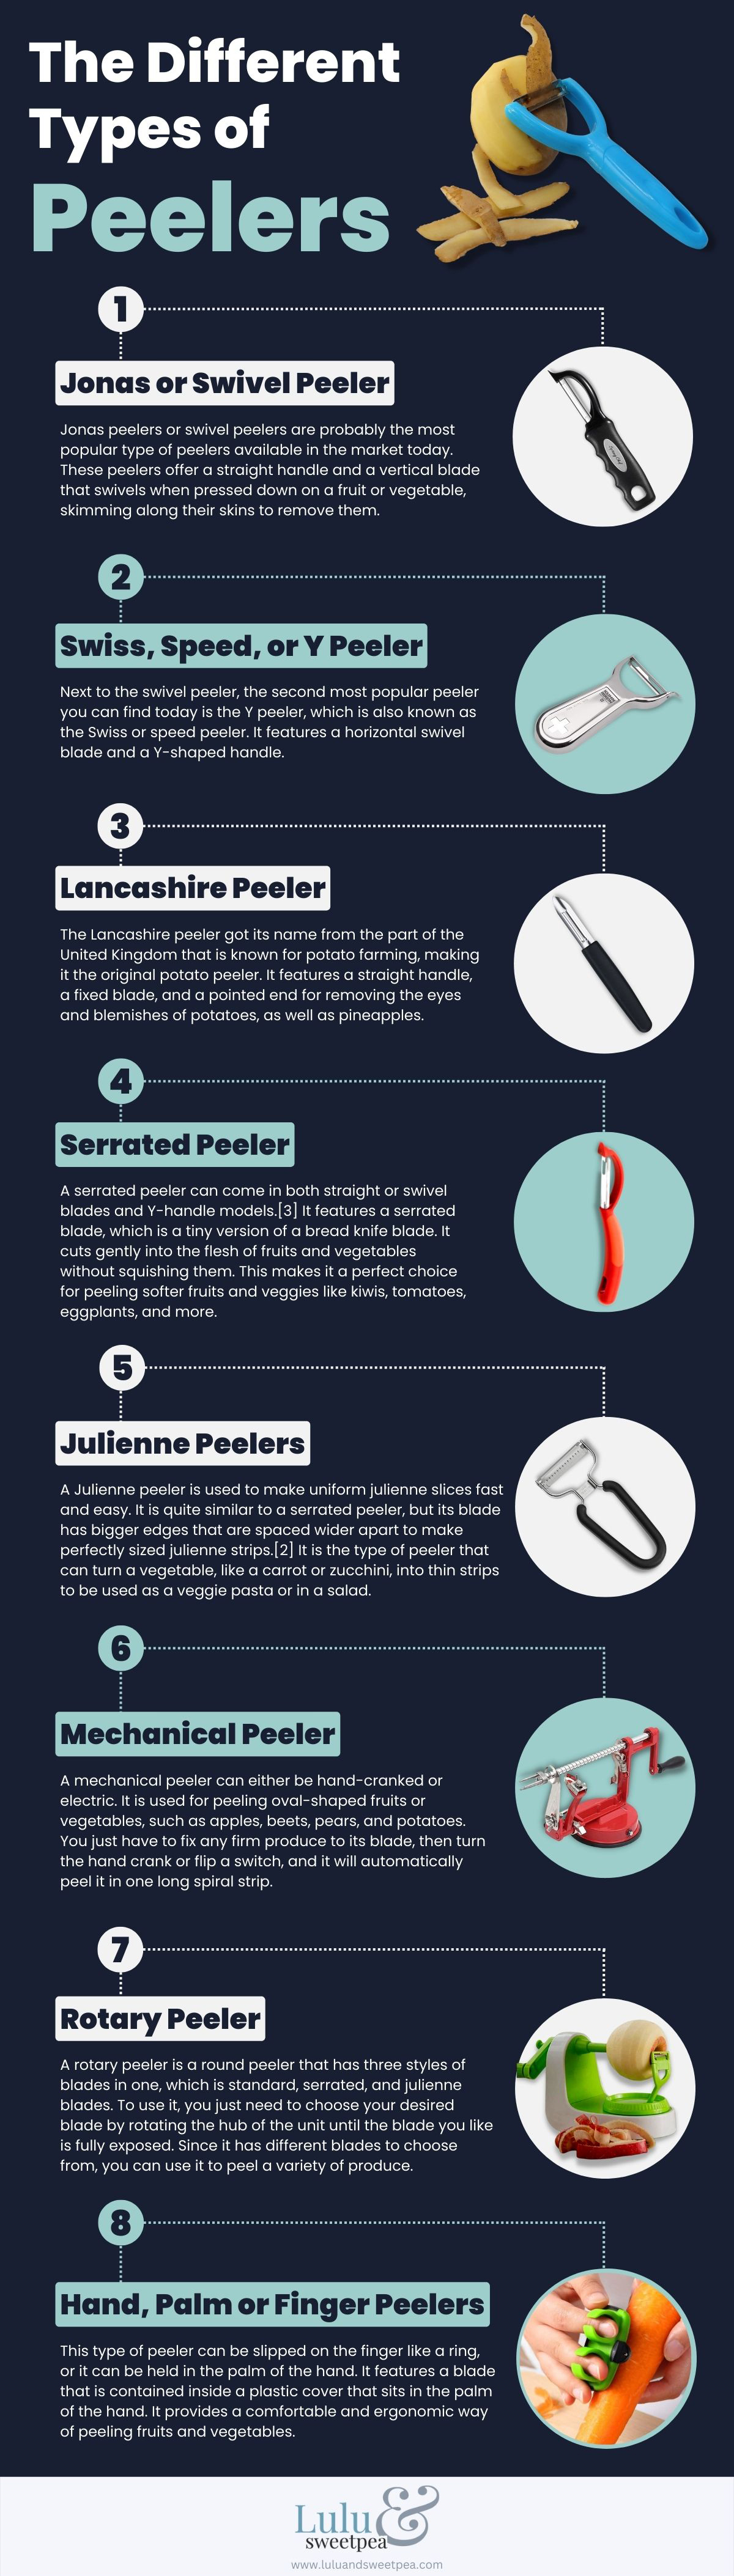 The Different Types of Peelers